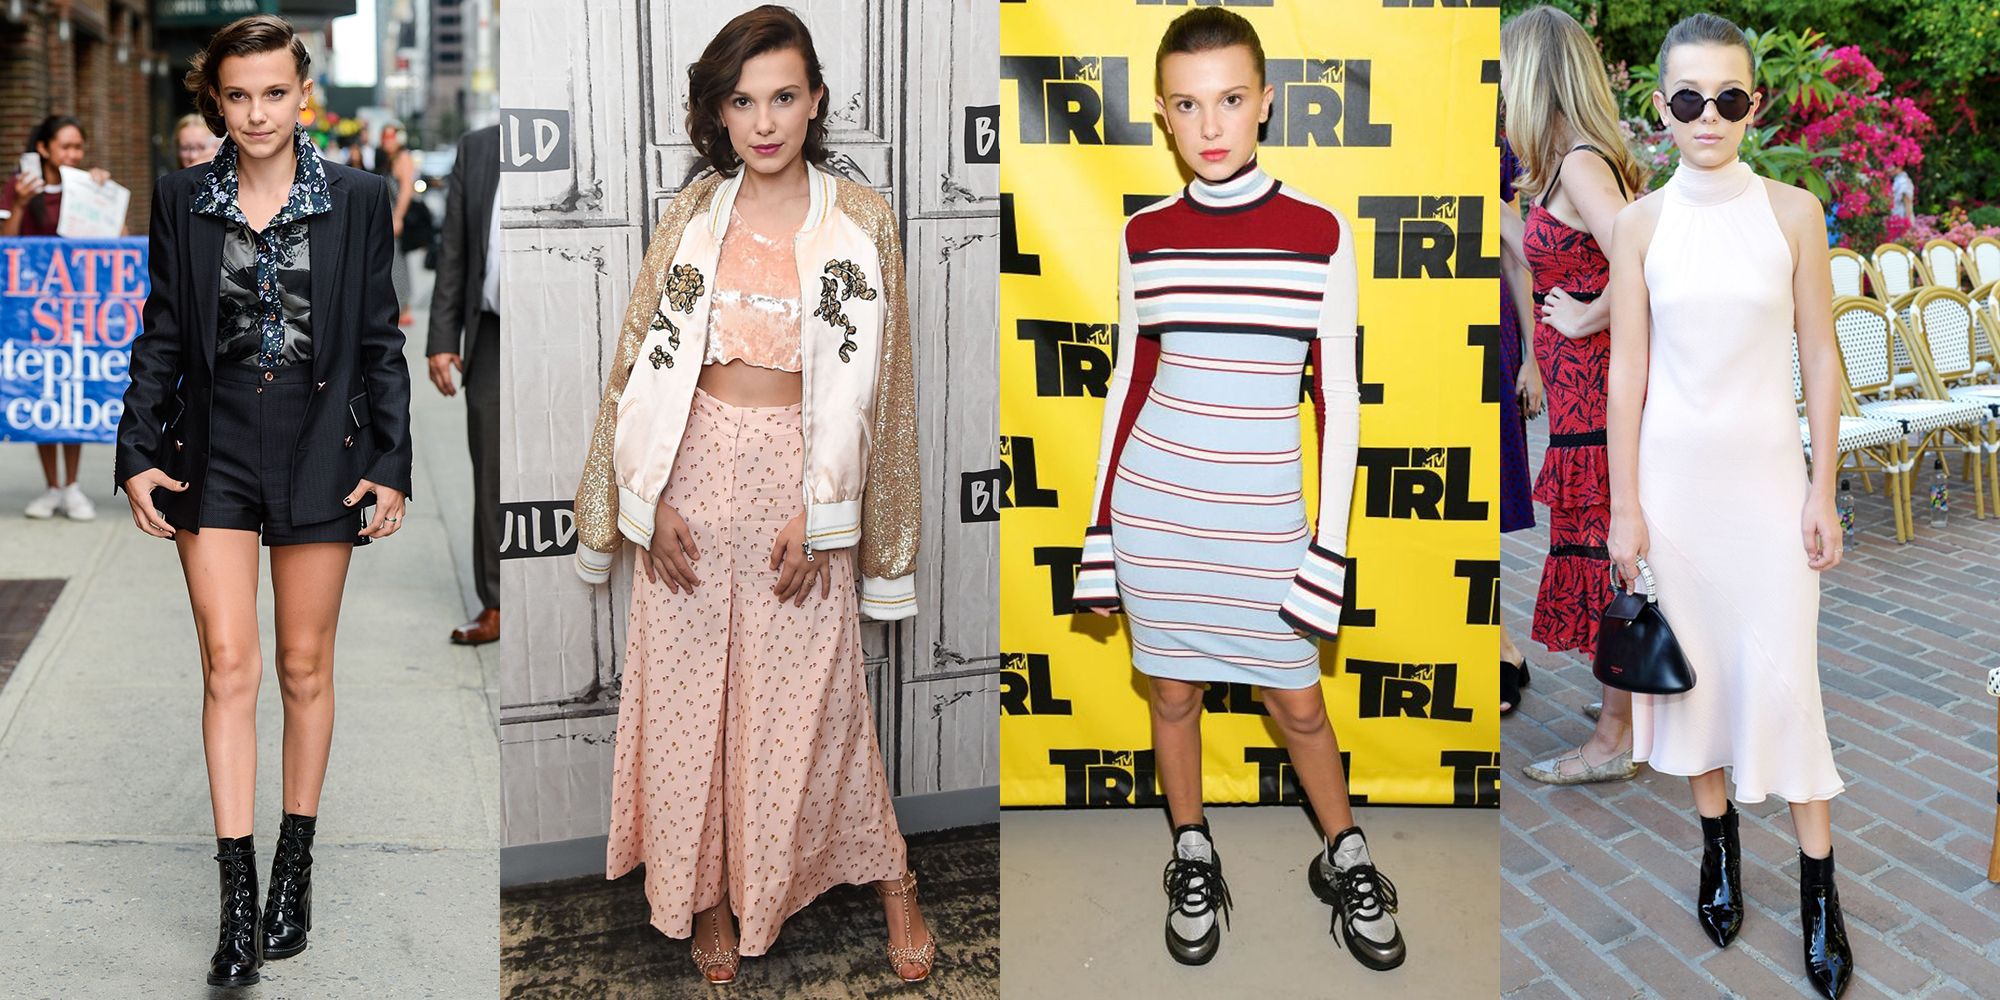 Millie Bobby Brown - Page 2 of 9 - Red Carpet Fashion Awards